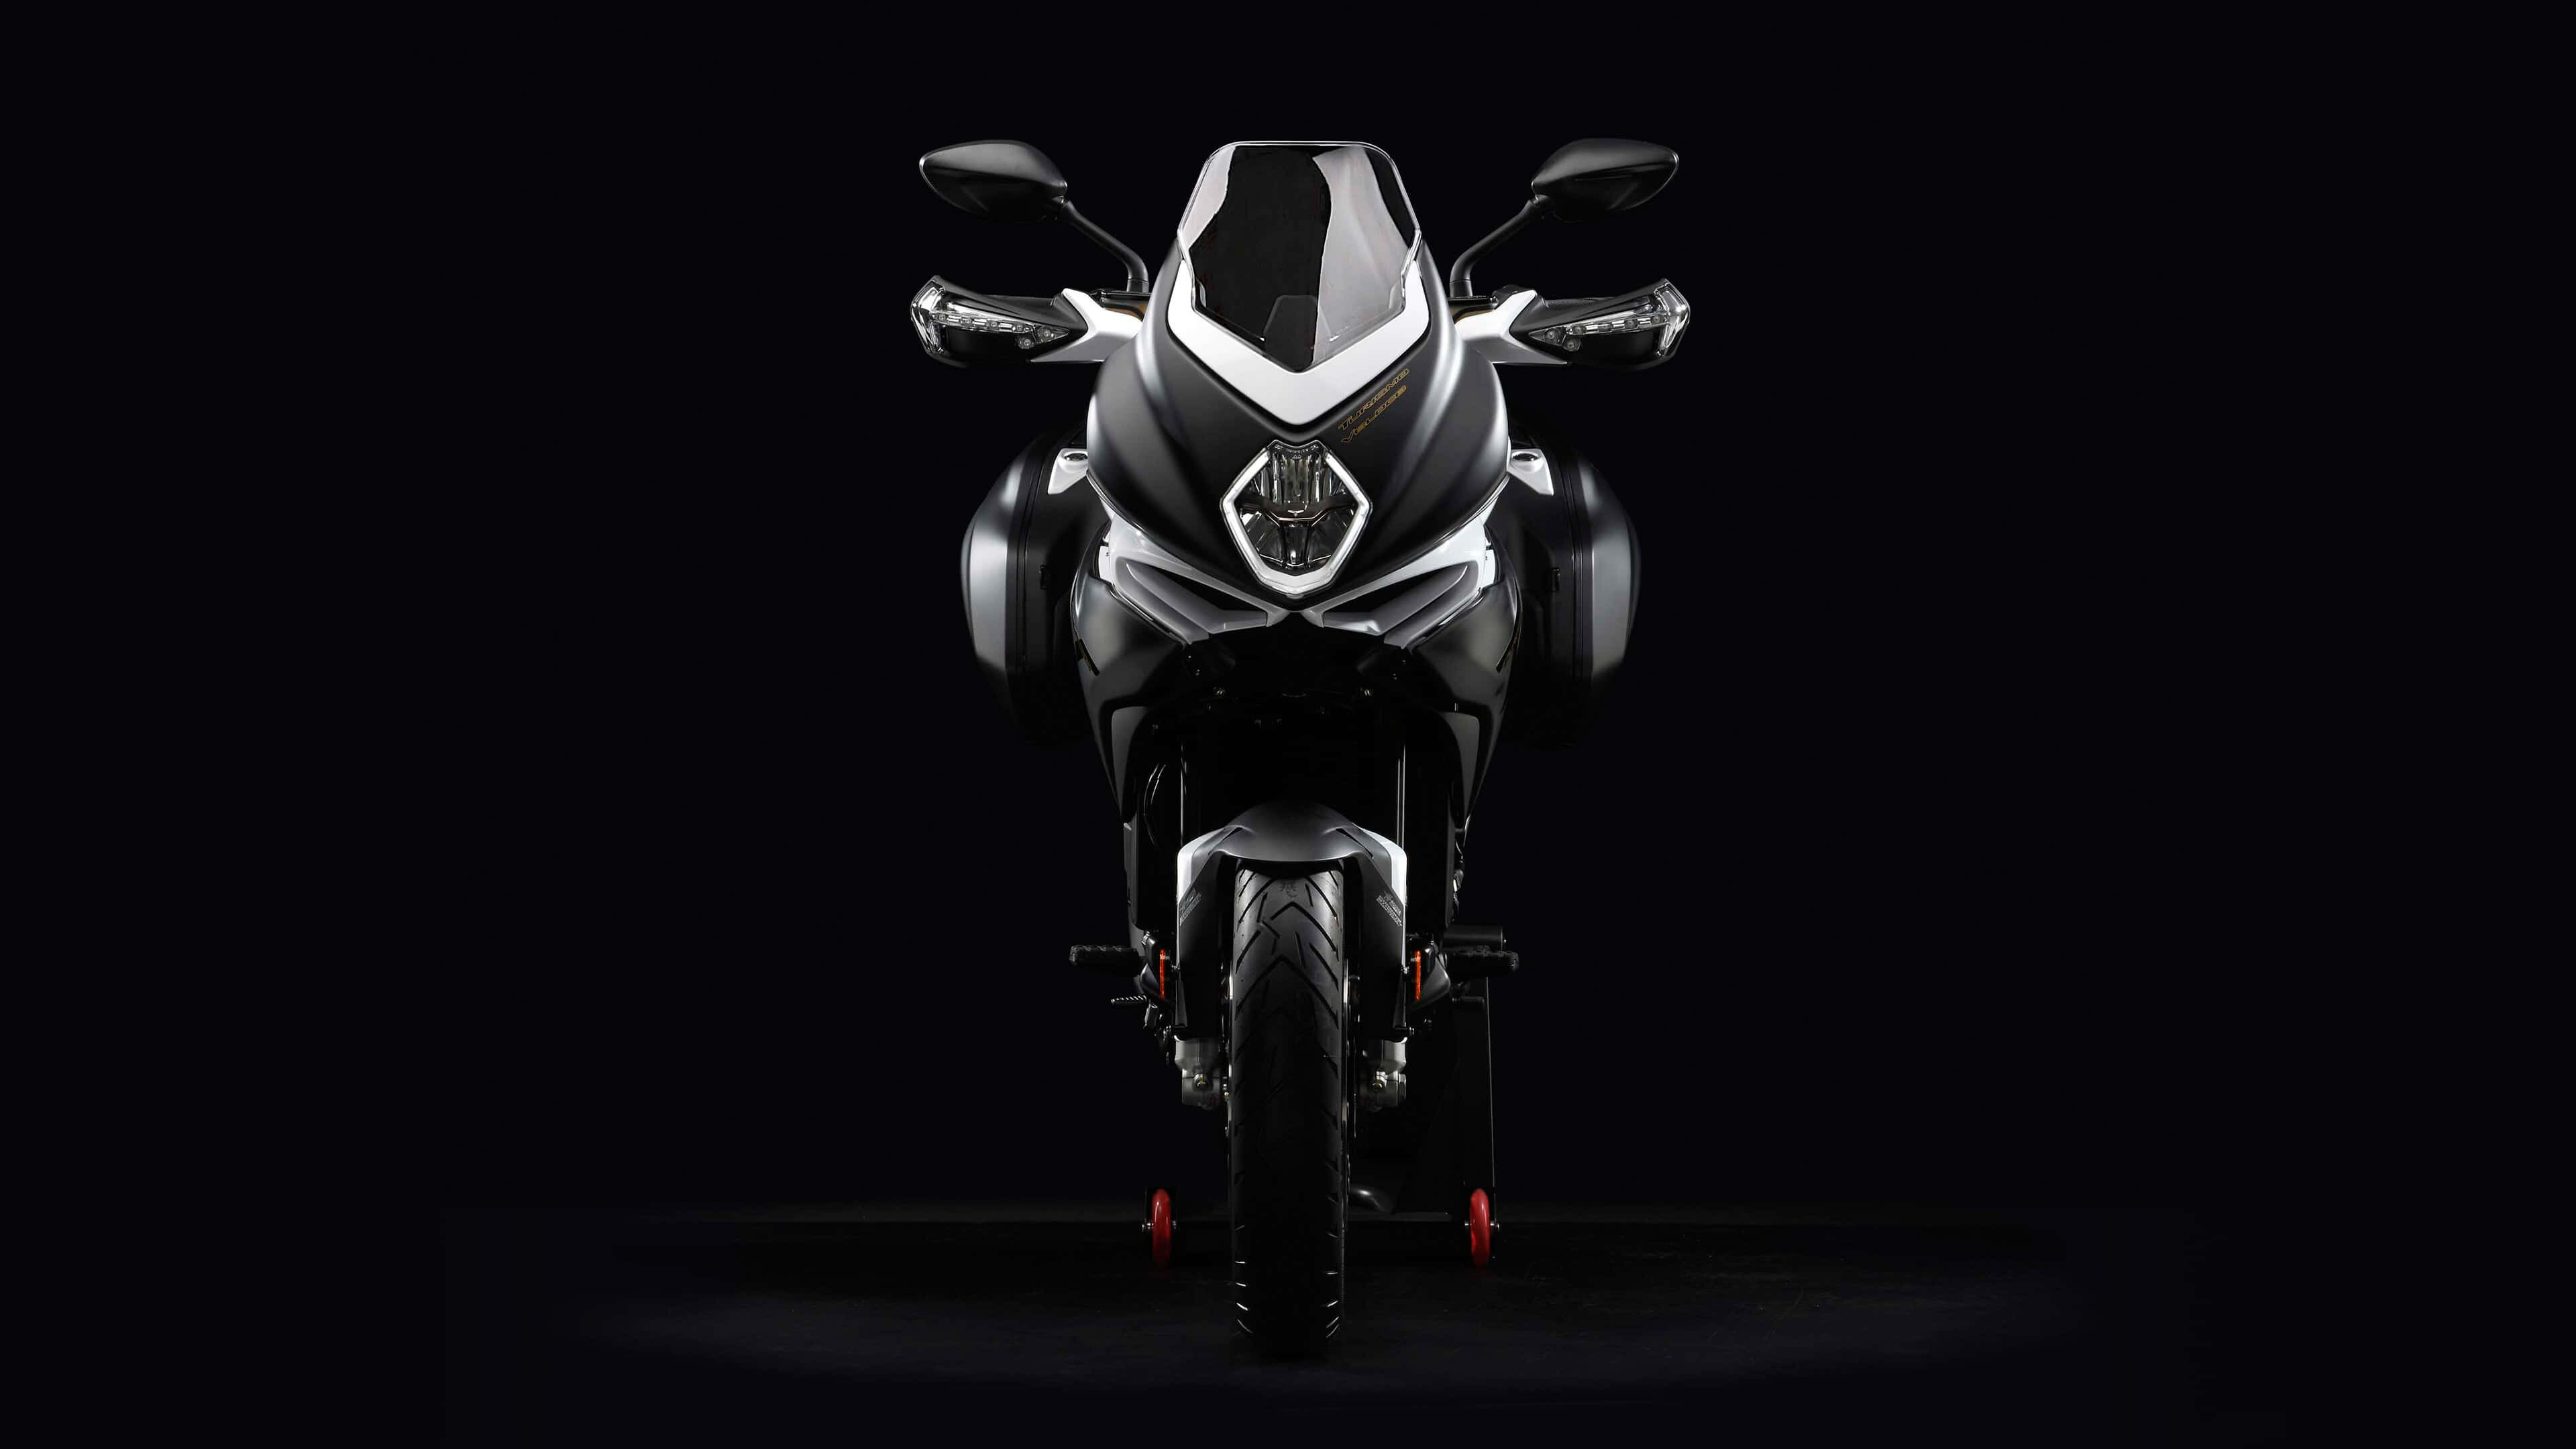 MV Agusta: Turismo Veloce 800 Lusso SCS, A luxury sport touring motorcycle. 3840x2160 4K Background.